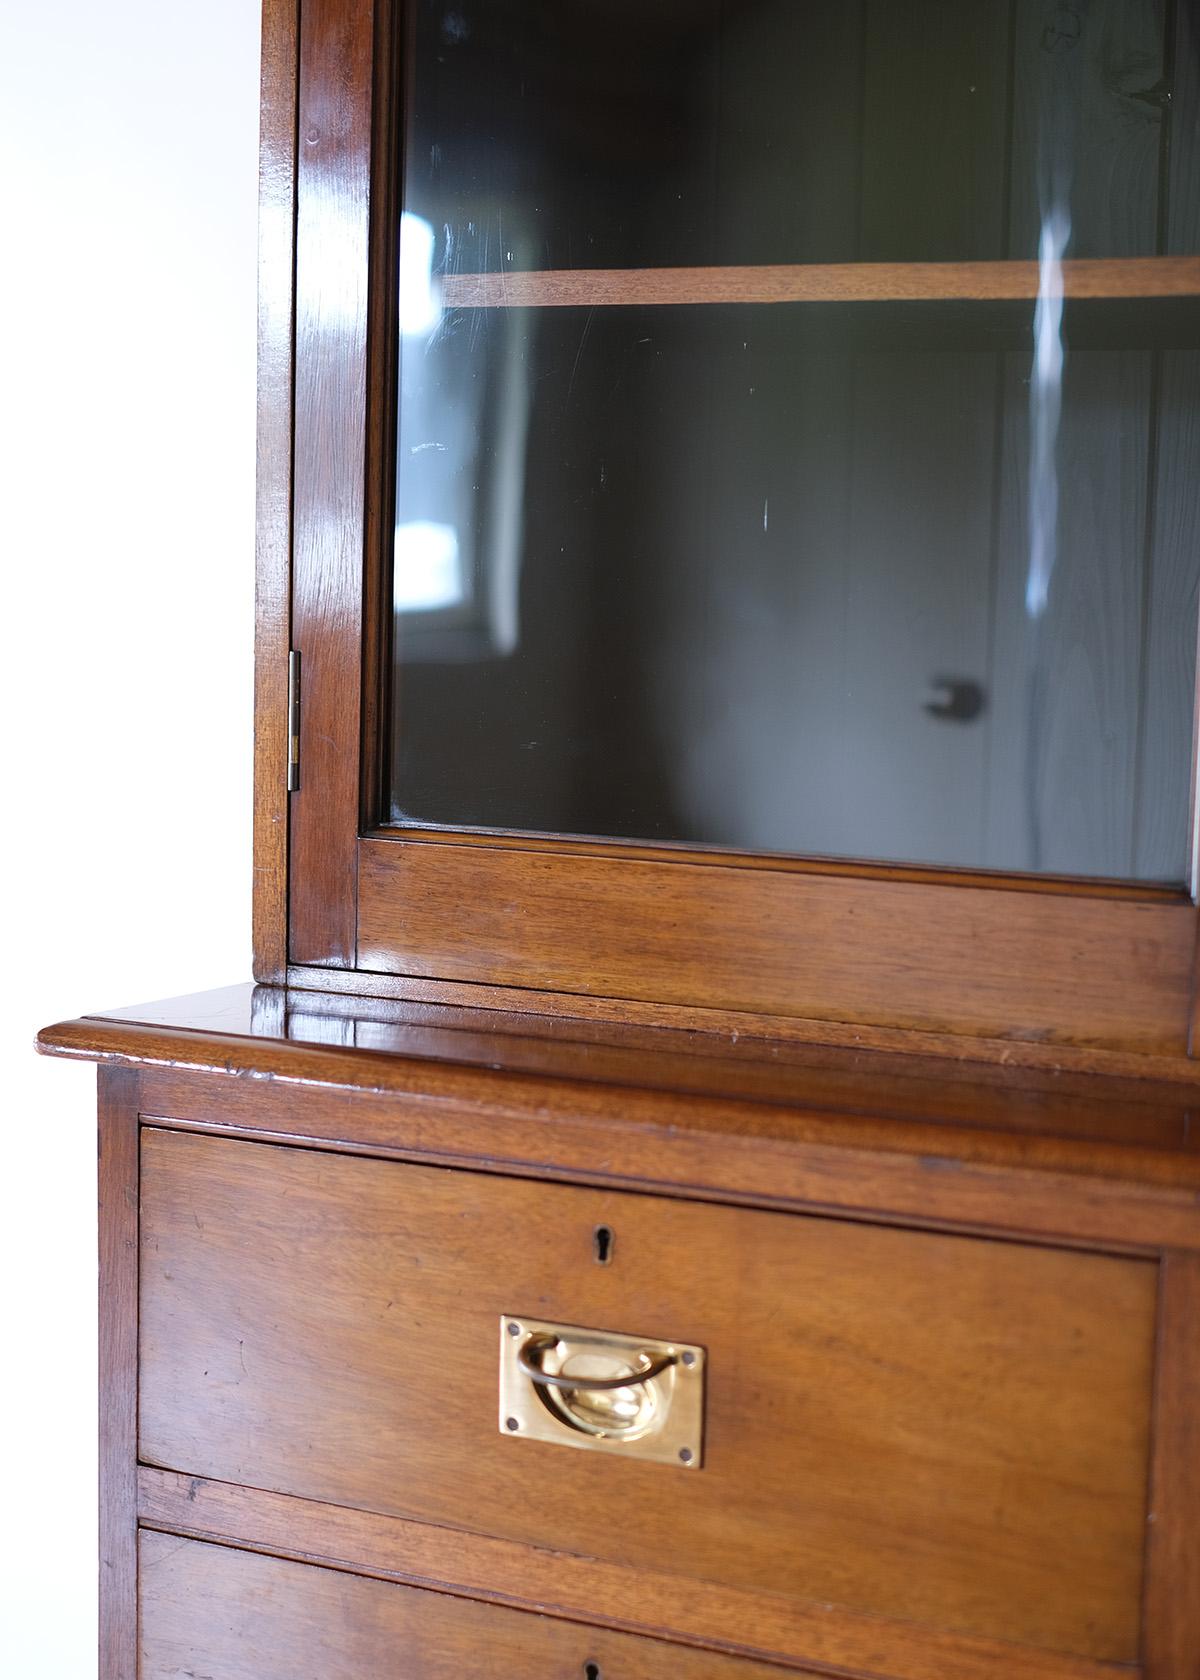 This beautiful Victorian cabinet captures the essence of a bygone era with its intricate woodwork and original glass features, showcasing the craftsmanship that defined the period. Its dual role as a functional storage unit and a piece of artistry